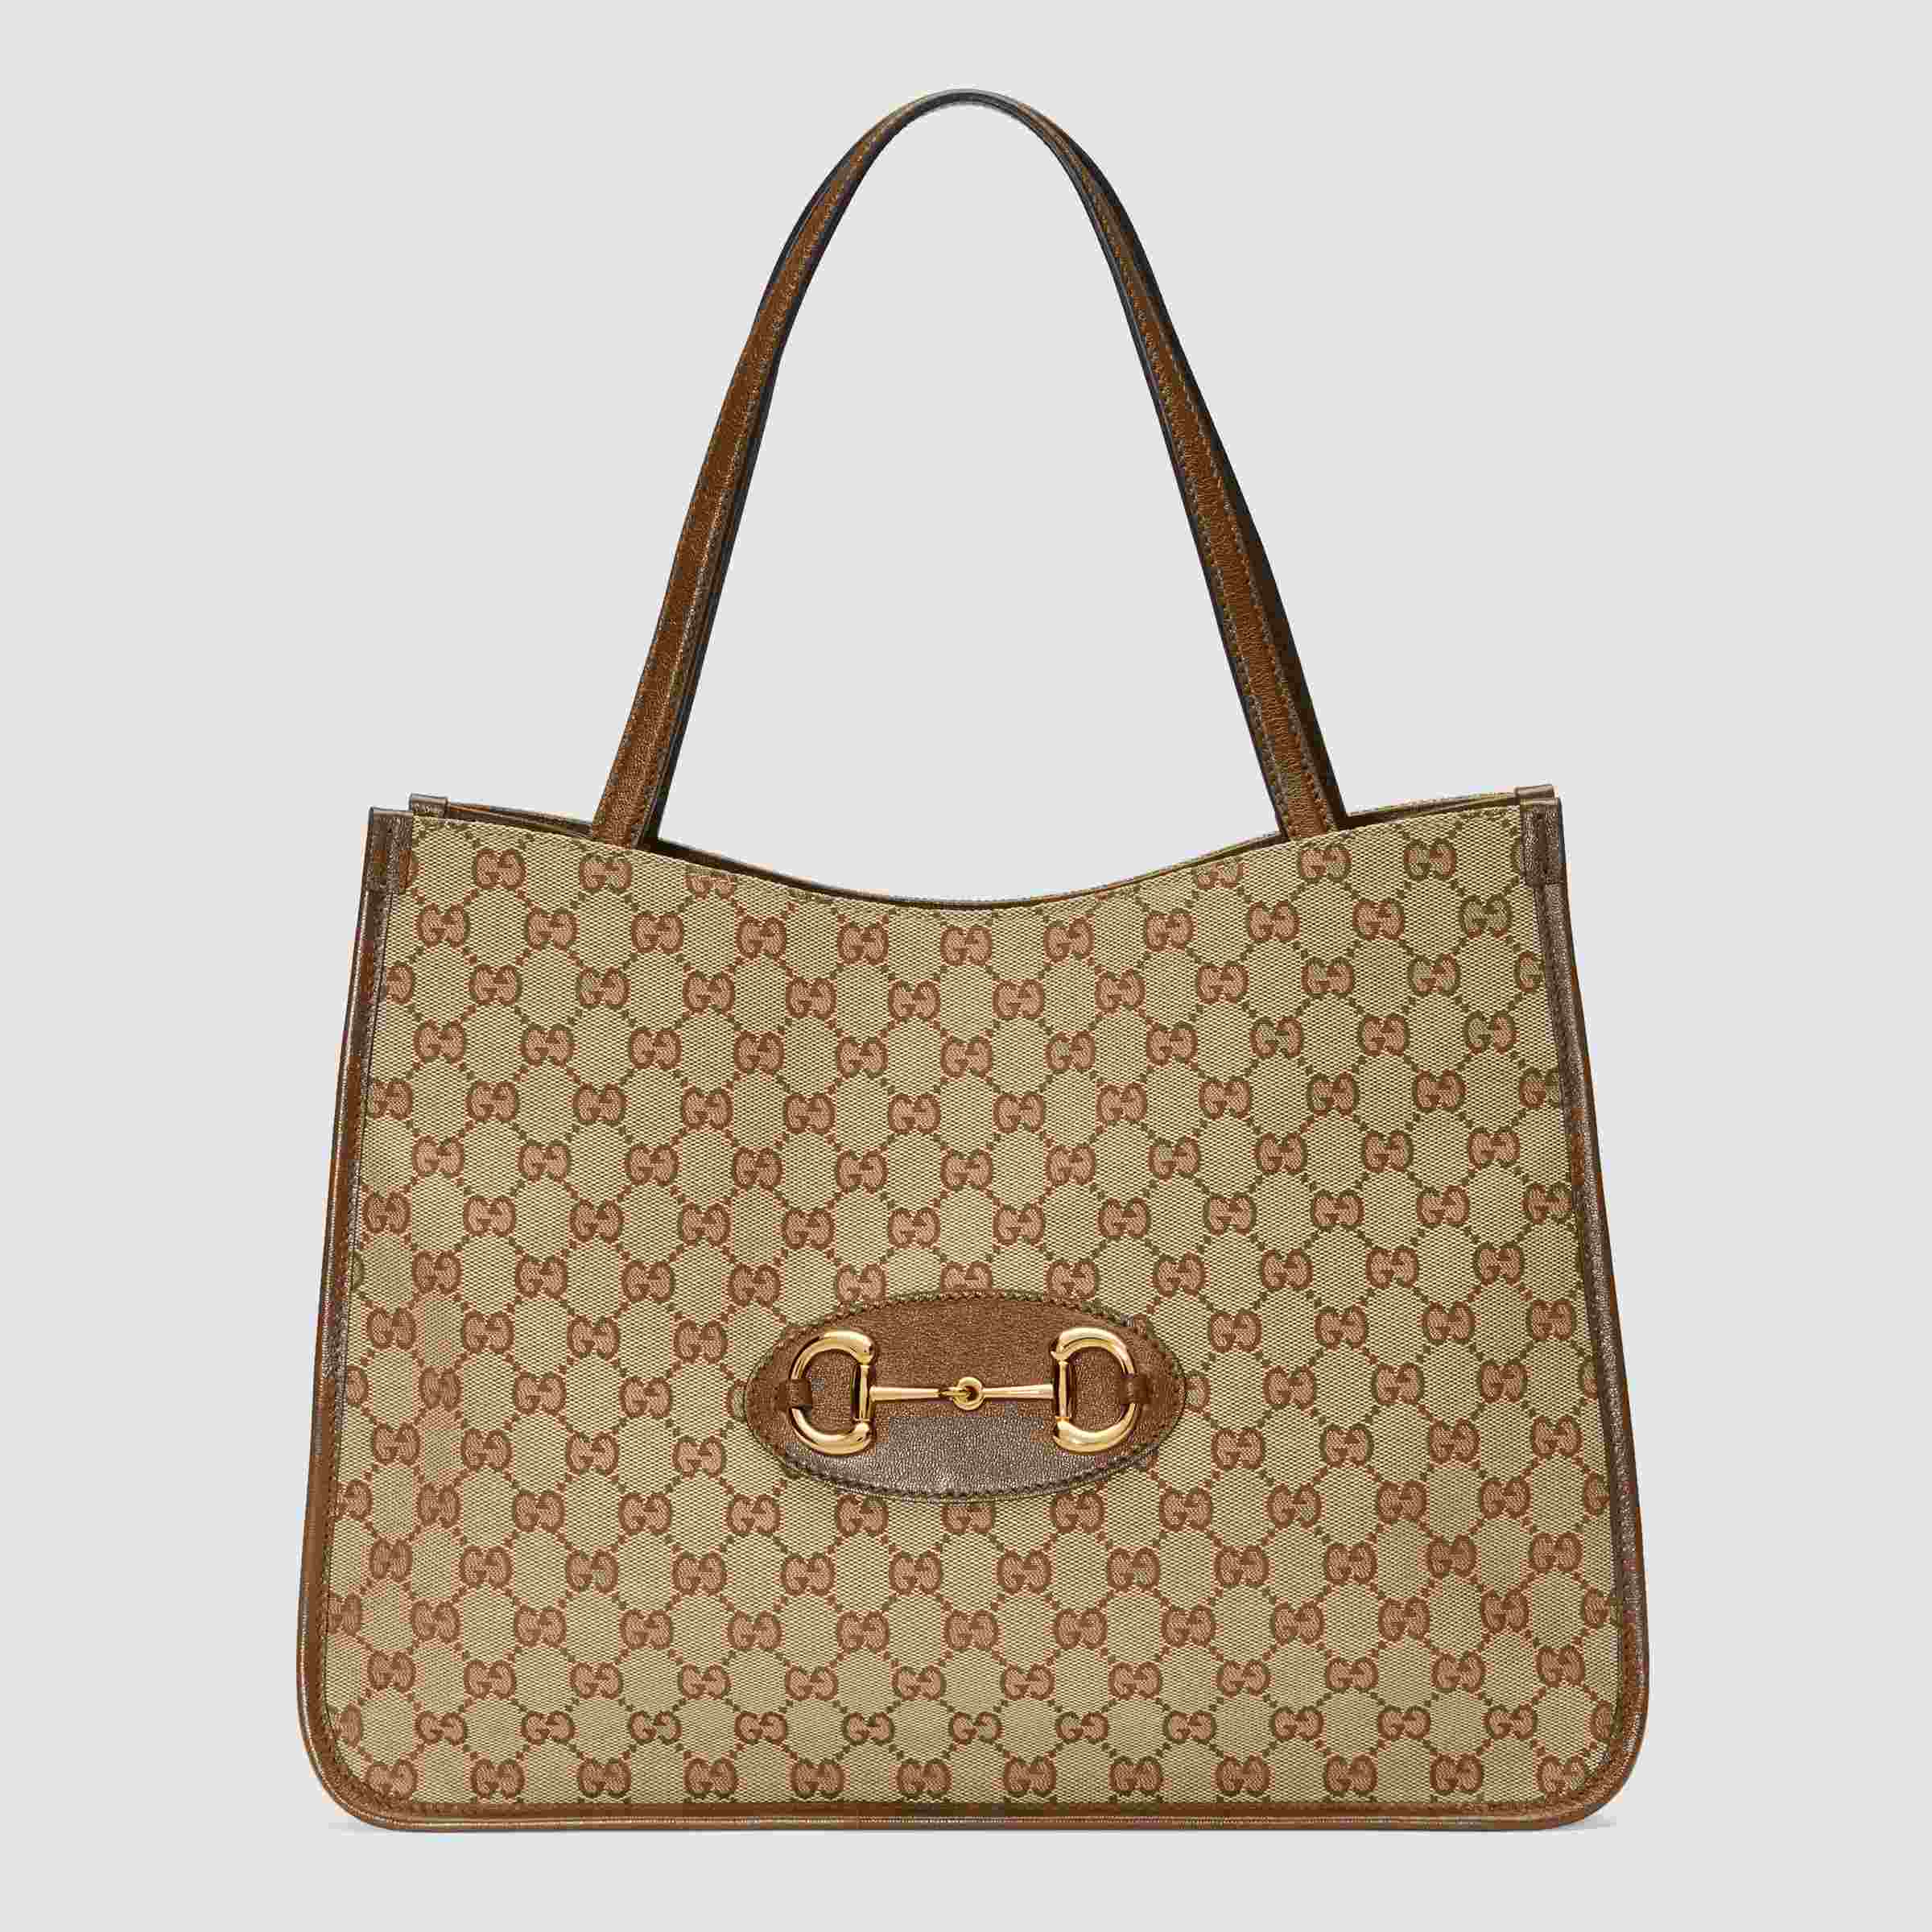 Giant Tote Bag From Louis Vuitton, Is It better than Dior Tote Book? New  Cabas Zippe GM 2.550$ 